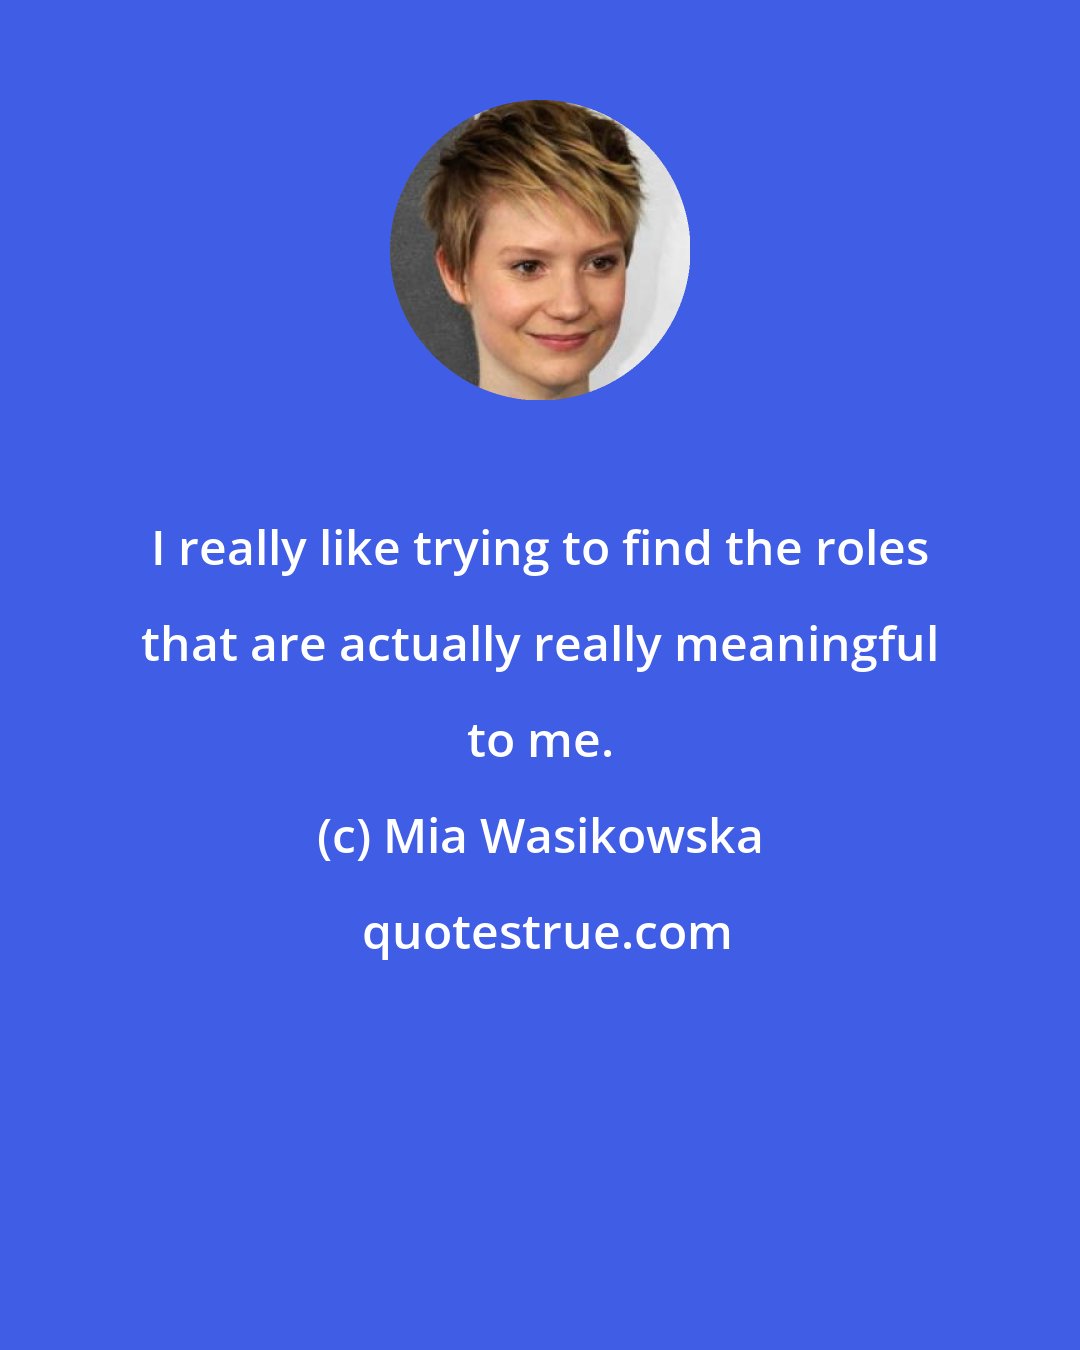 Mia Wasikowska: I really like trying to find the roles that are actually really meaningful to me.